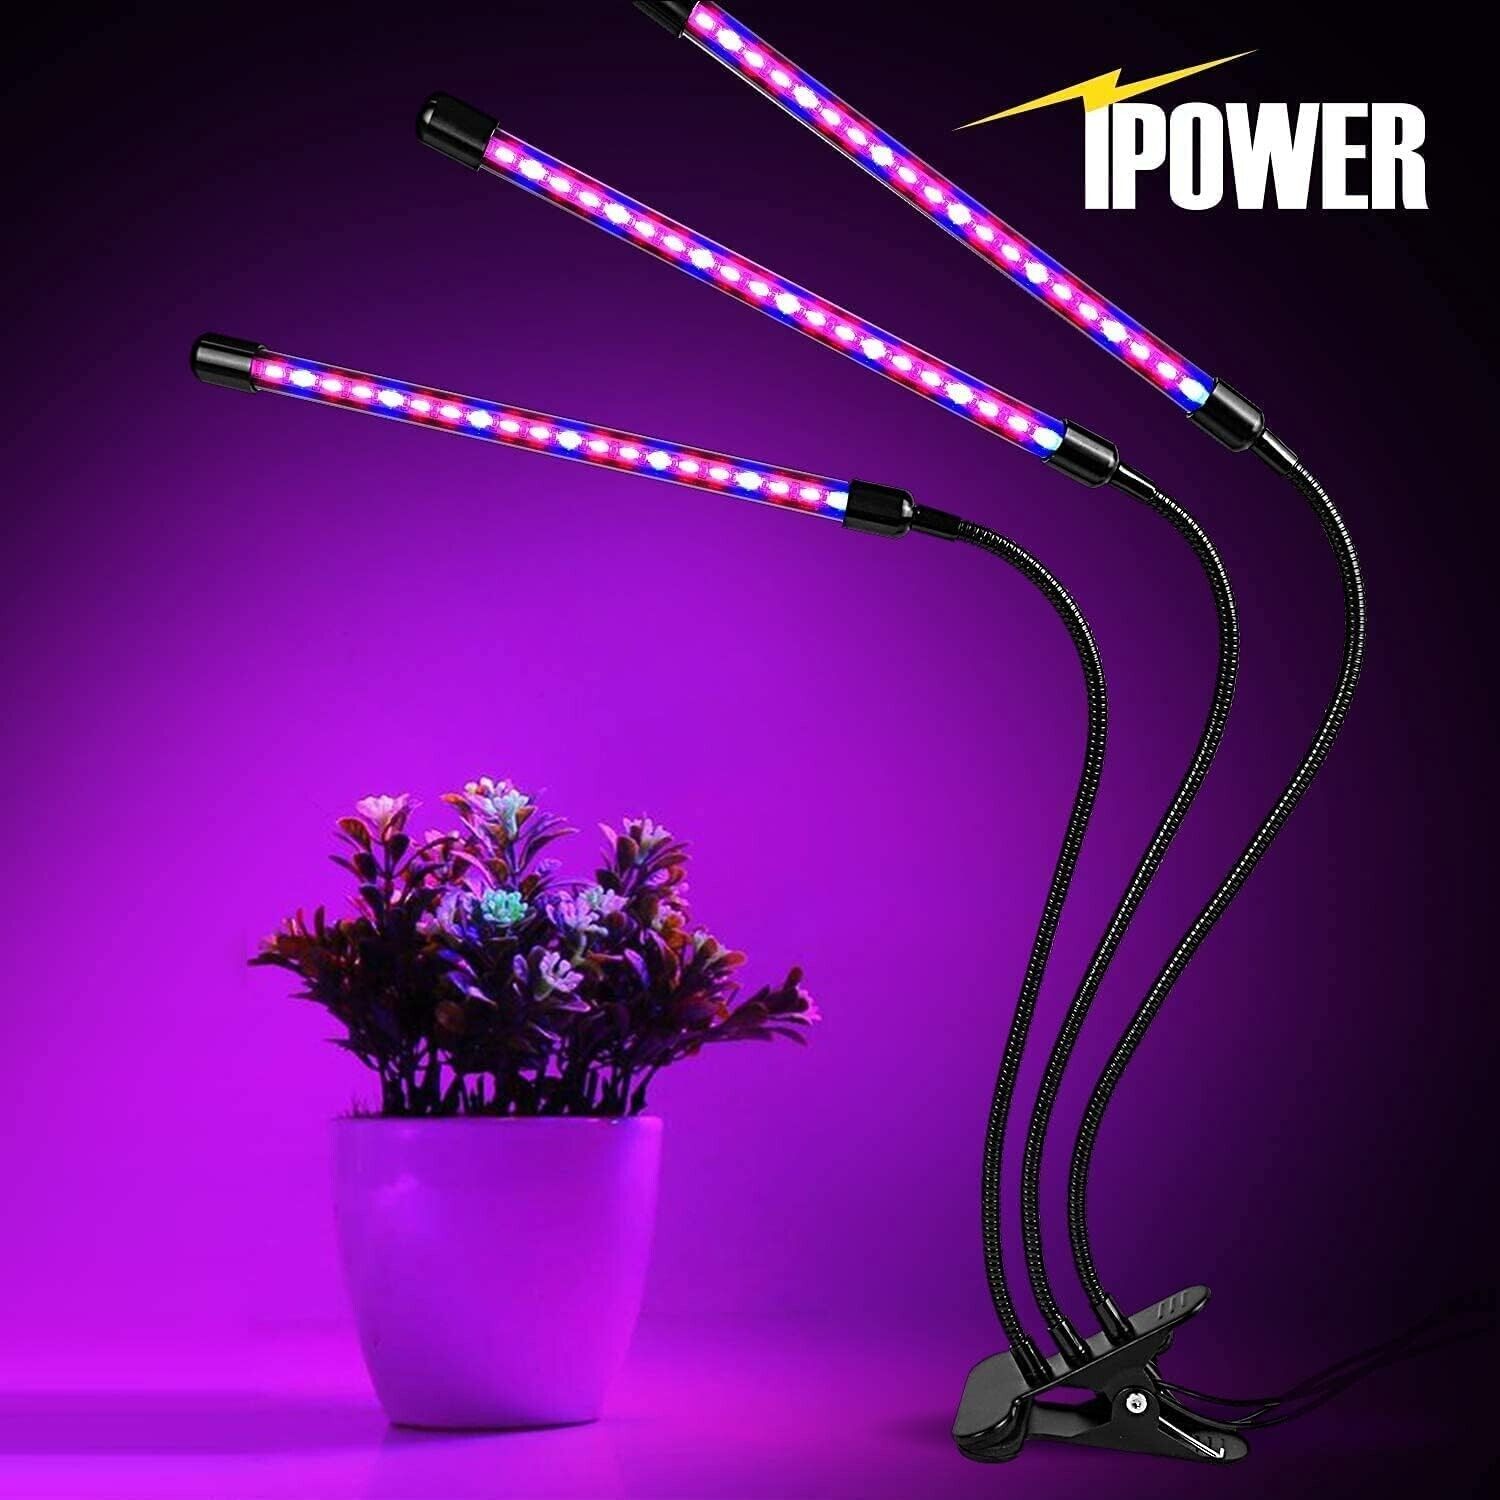 LED Grow Light Plant Growing Lamp Full Spectrum for Indoor Plants Hydroponics